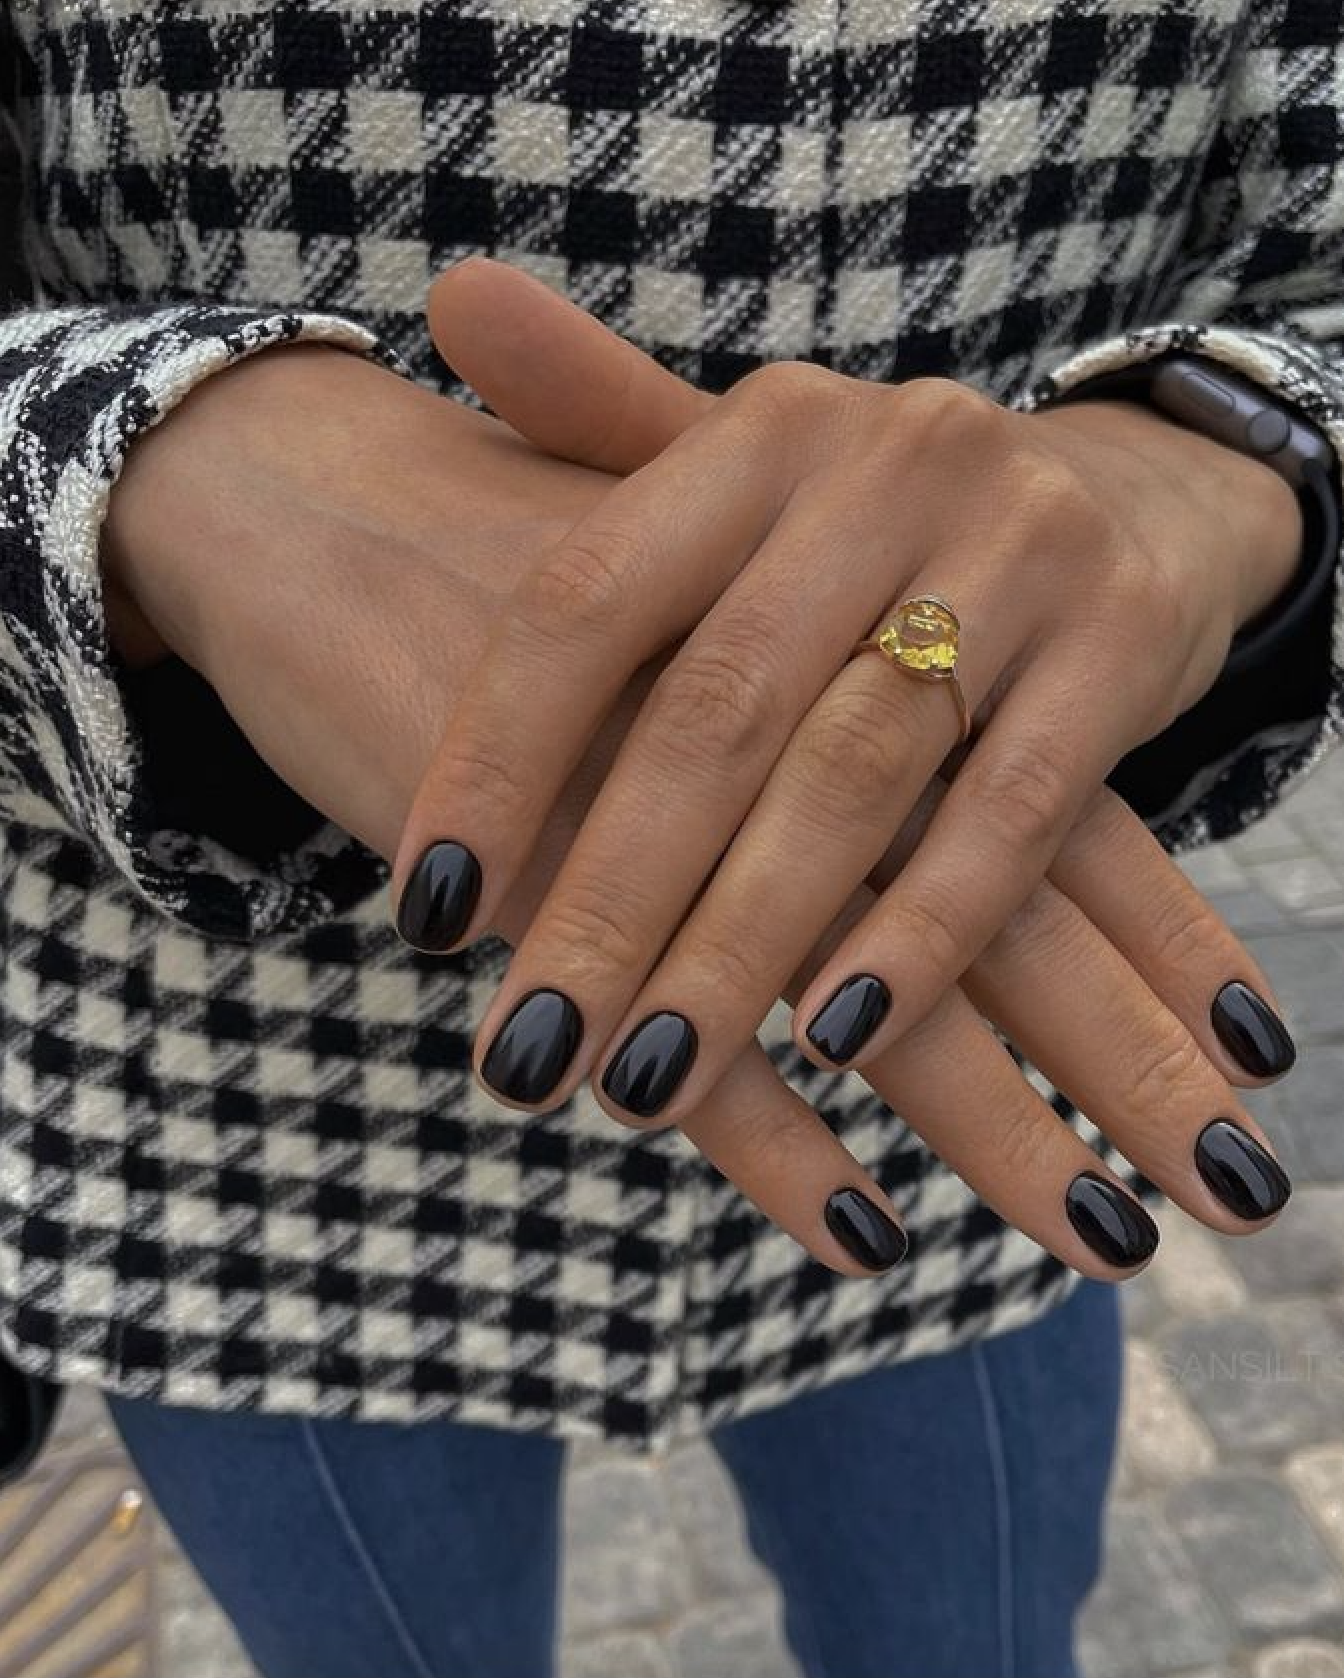 17 Black Glitter Nail Ideas for a Polished, Sparkly Mani